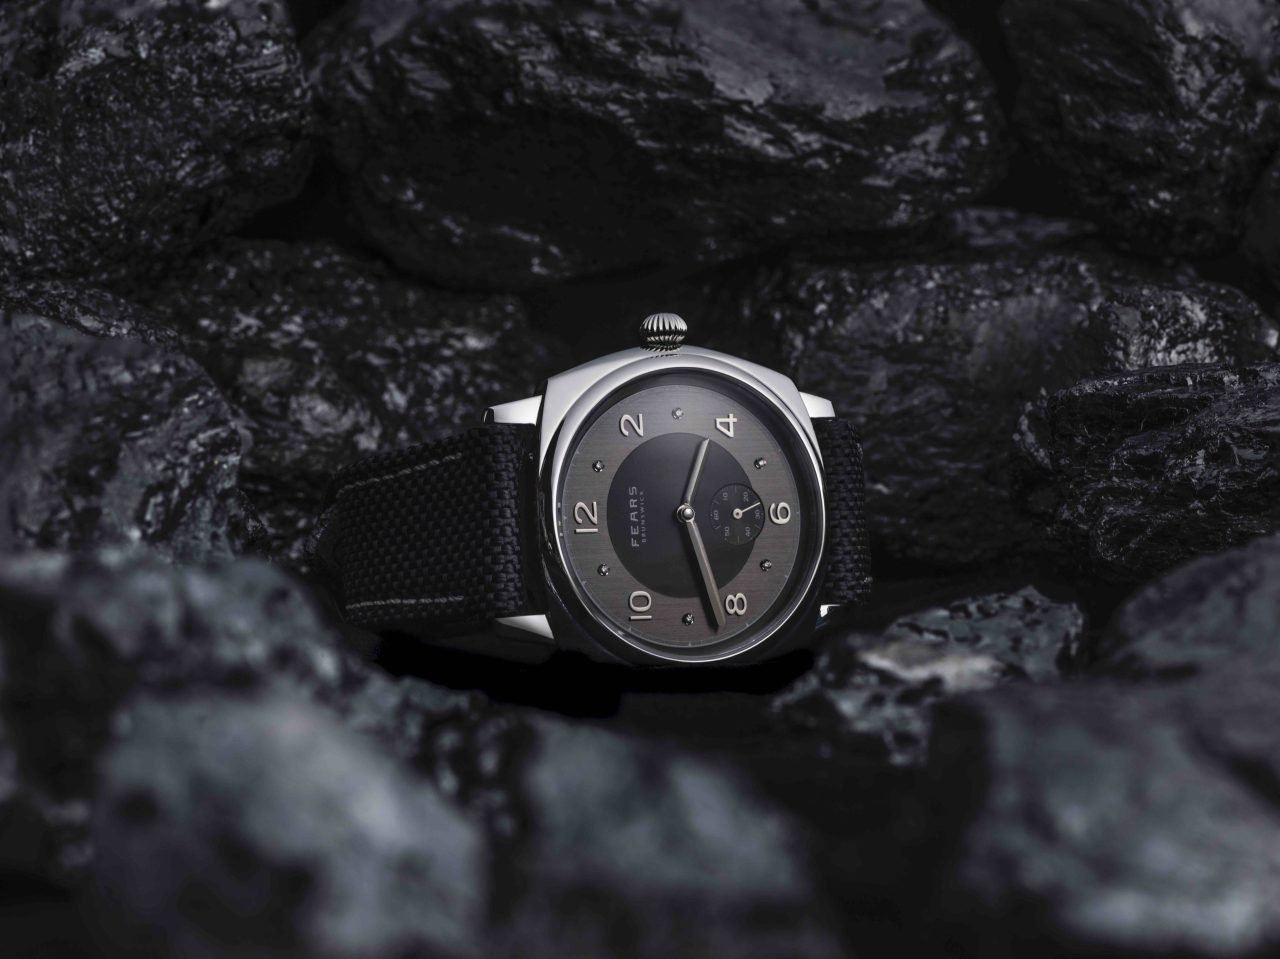 Fears Brunswick PT – Anthracite and Diamond dial on an Obsidian Black Kevlar strap – surrounded by Anthracite